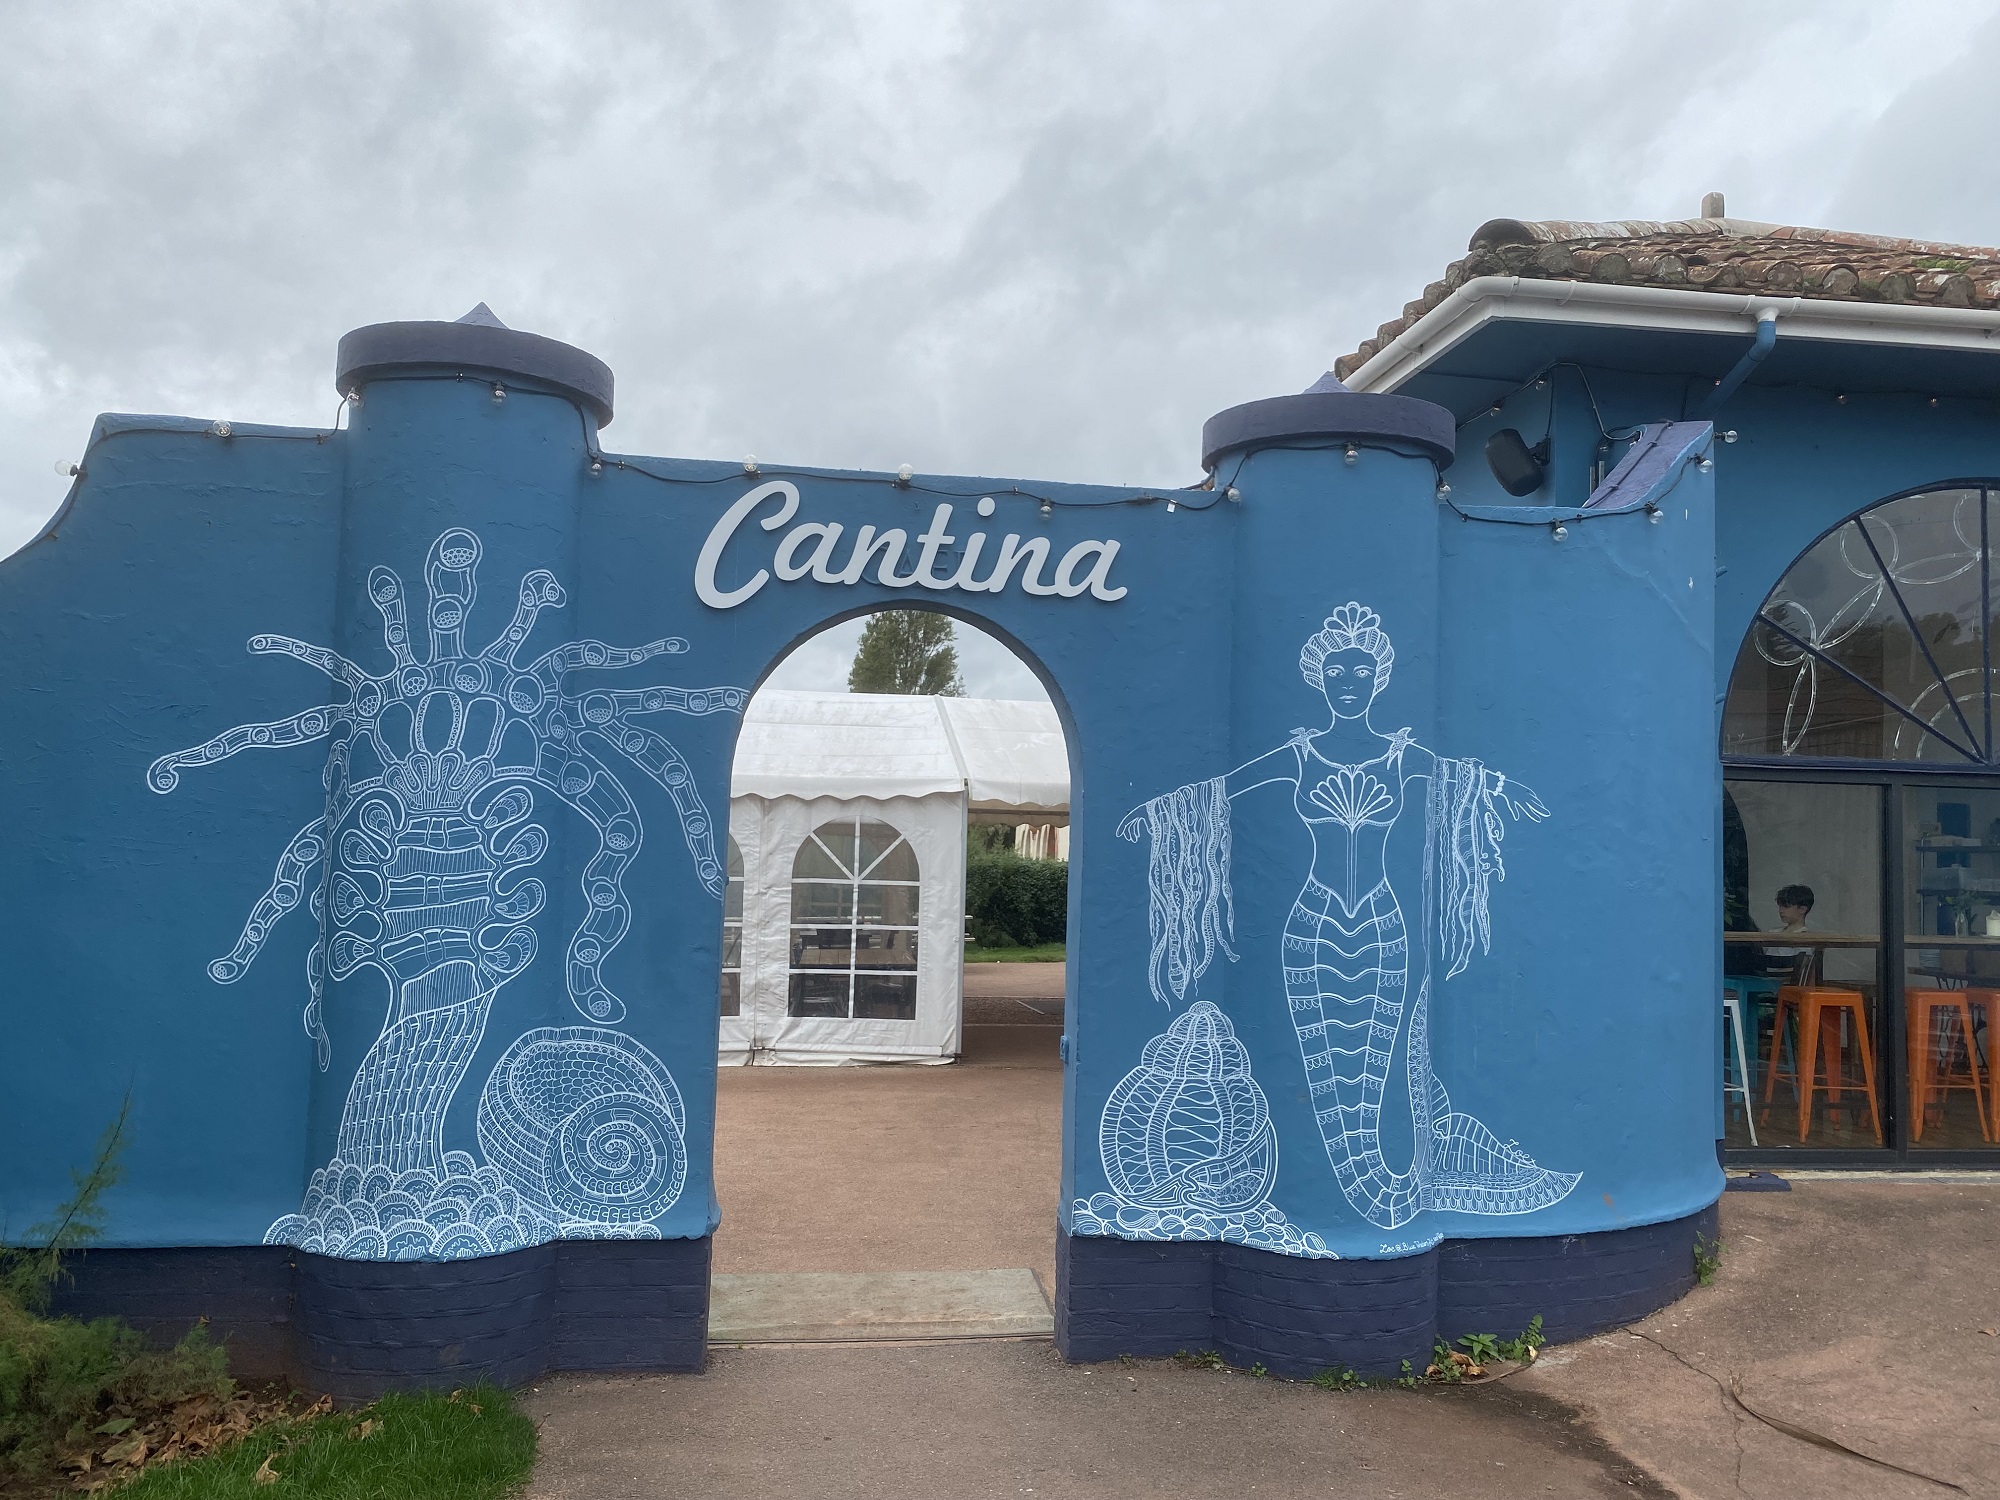 Cantina kitchen and Bar, Goodrington on The English riviera - dog friendly places to eat in south Devon